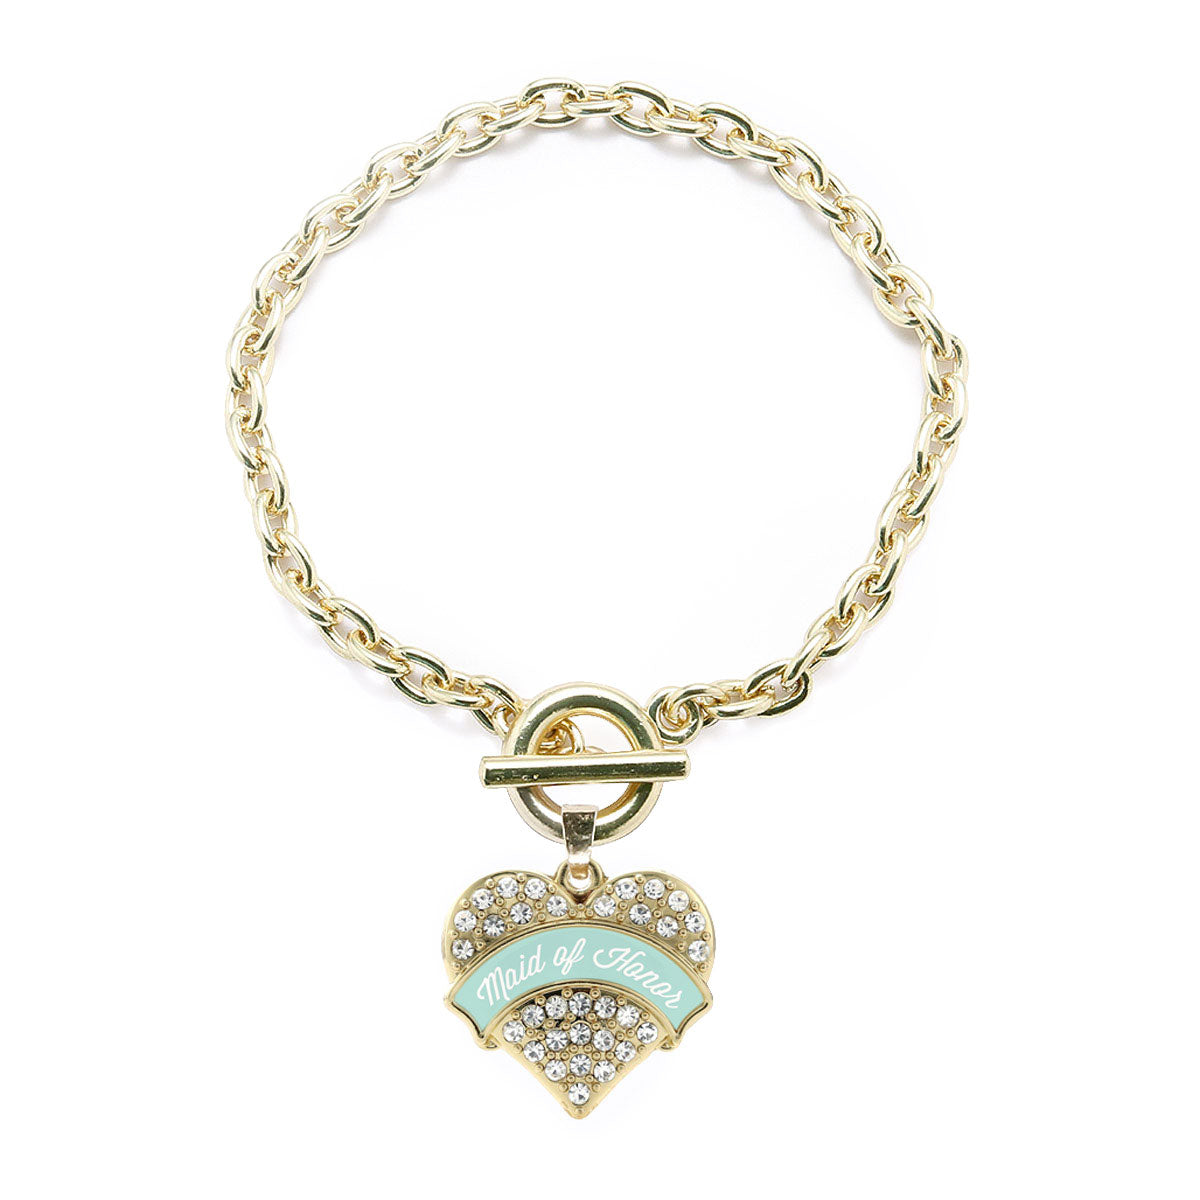 Gold Mint Maid of Honor Pave Heart Charm Toggle Bracelet